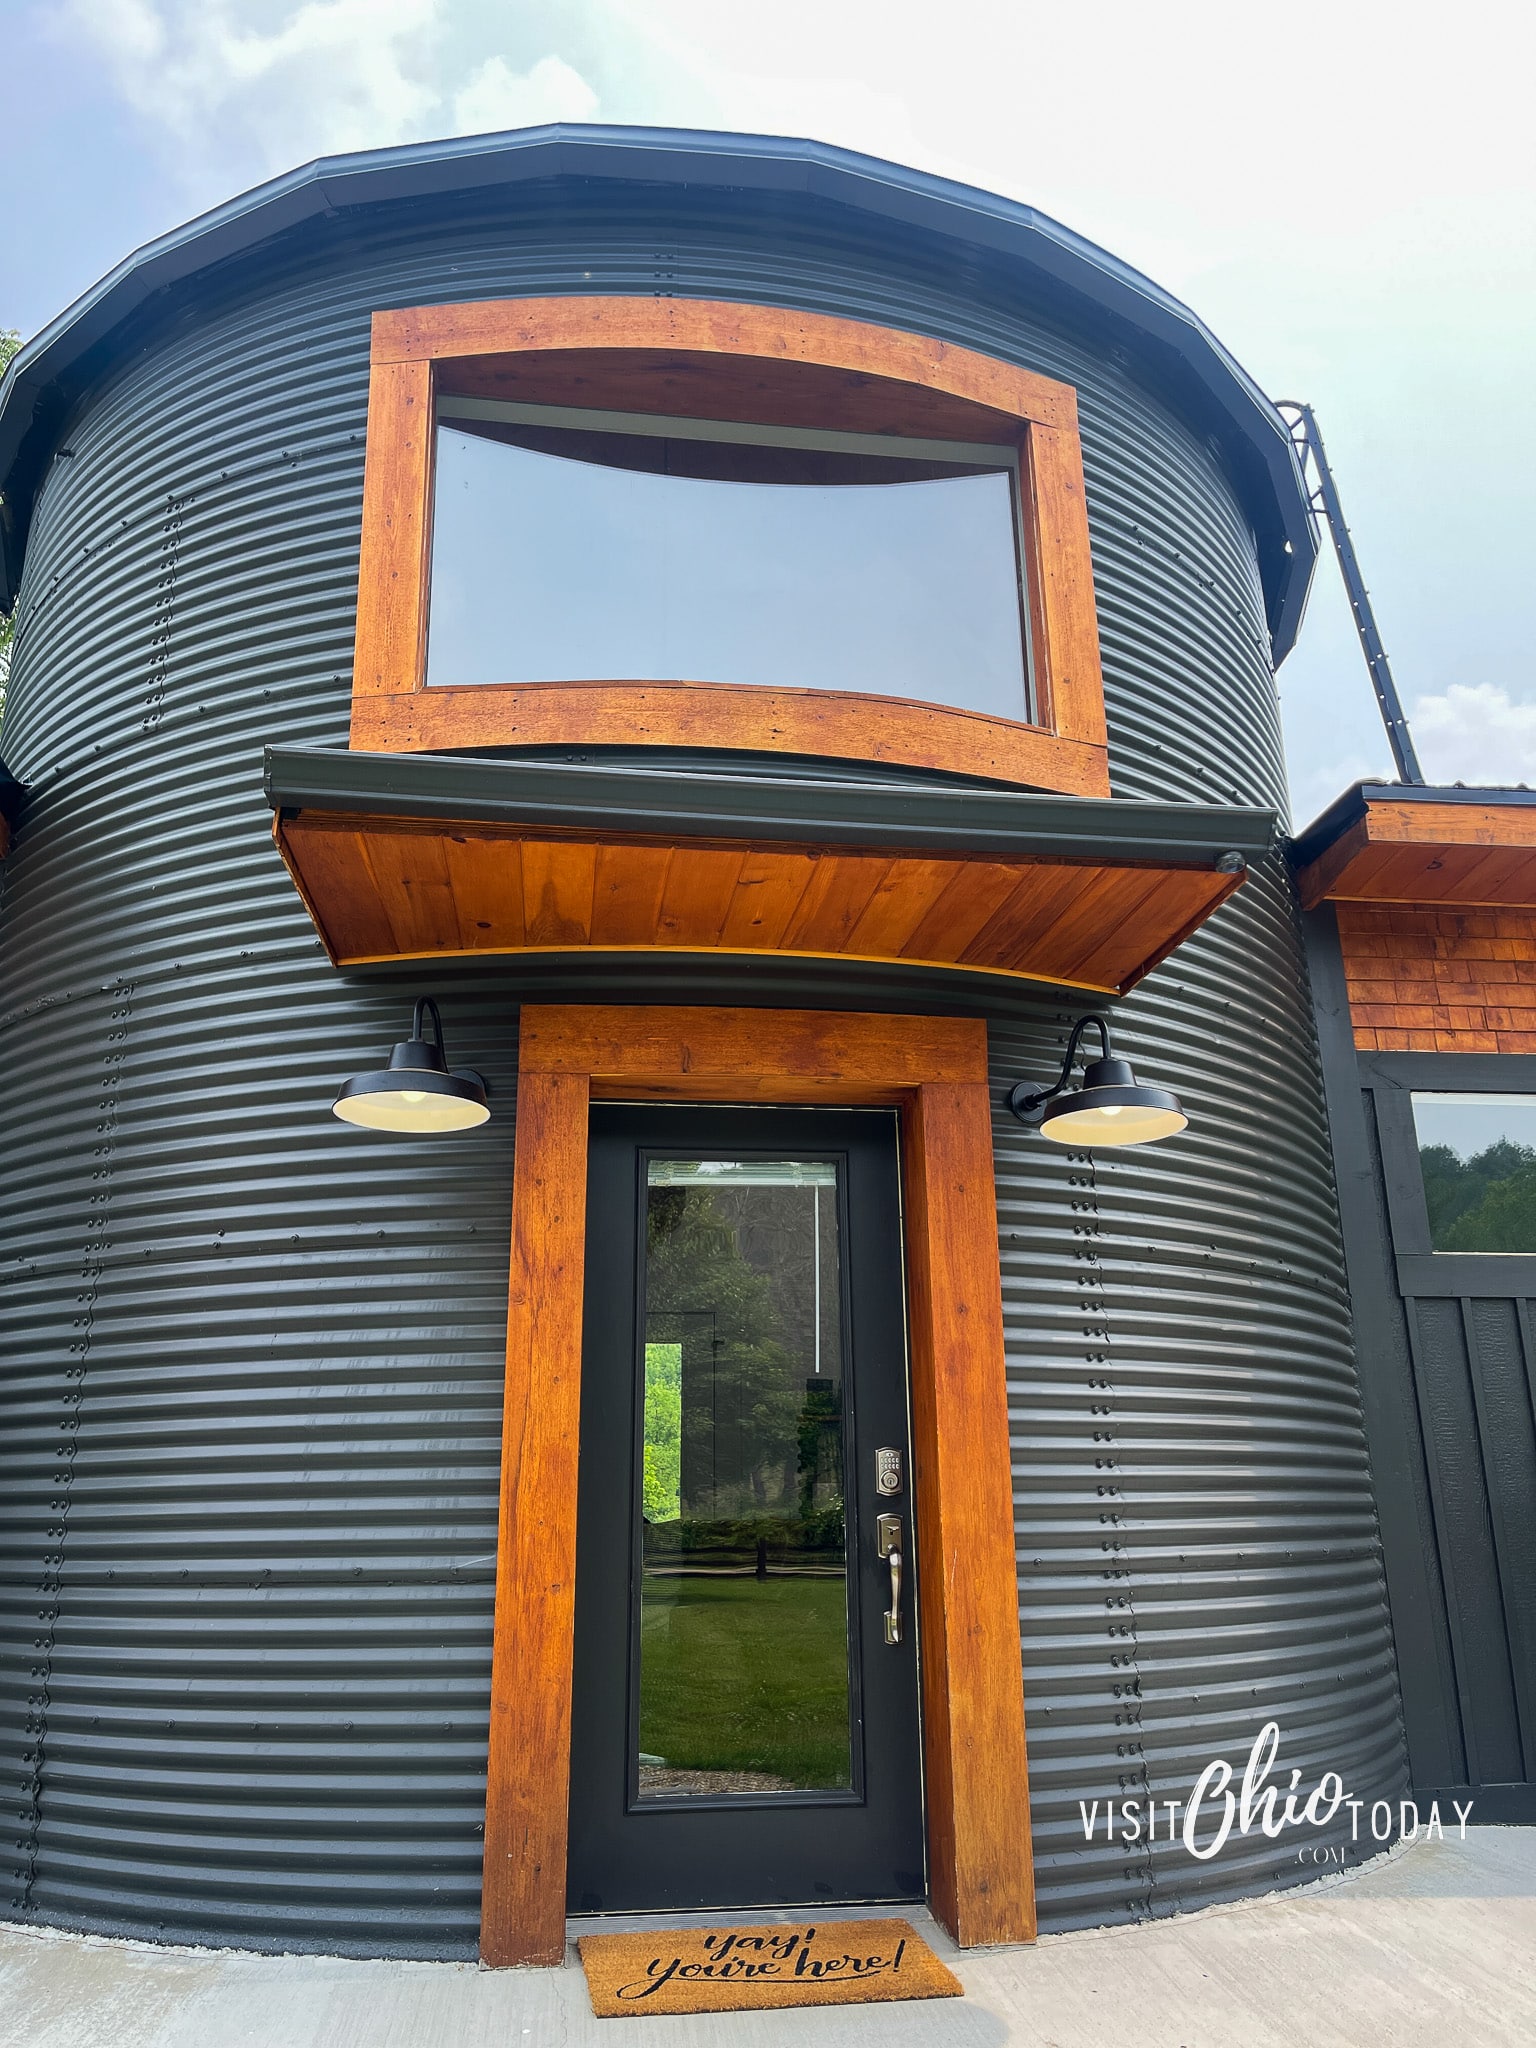 close up of the silo portion of the silo cottage in hocking hills, you can see the front door with has dark wood around it and a large window above the door with wood around it. Photo credit: Cindy Gordon of VisitOhioToday.com